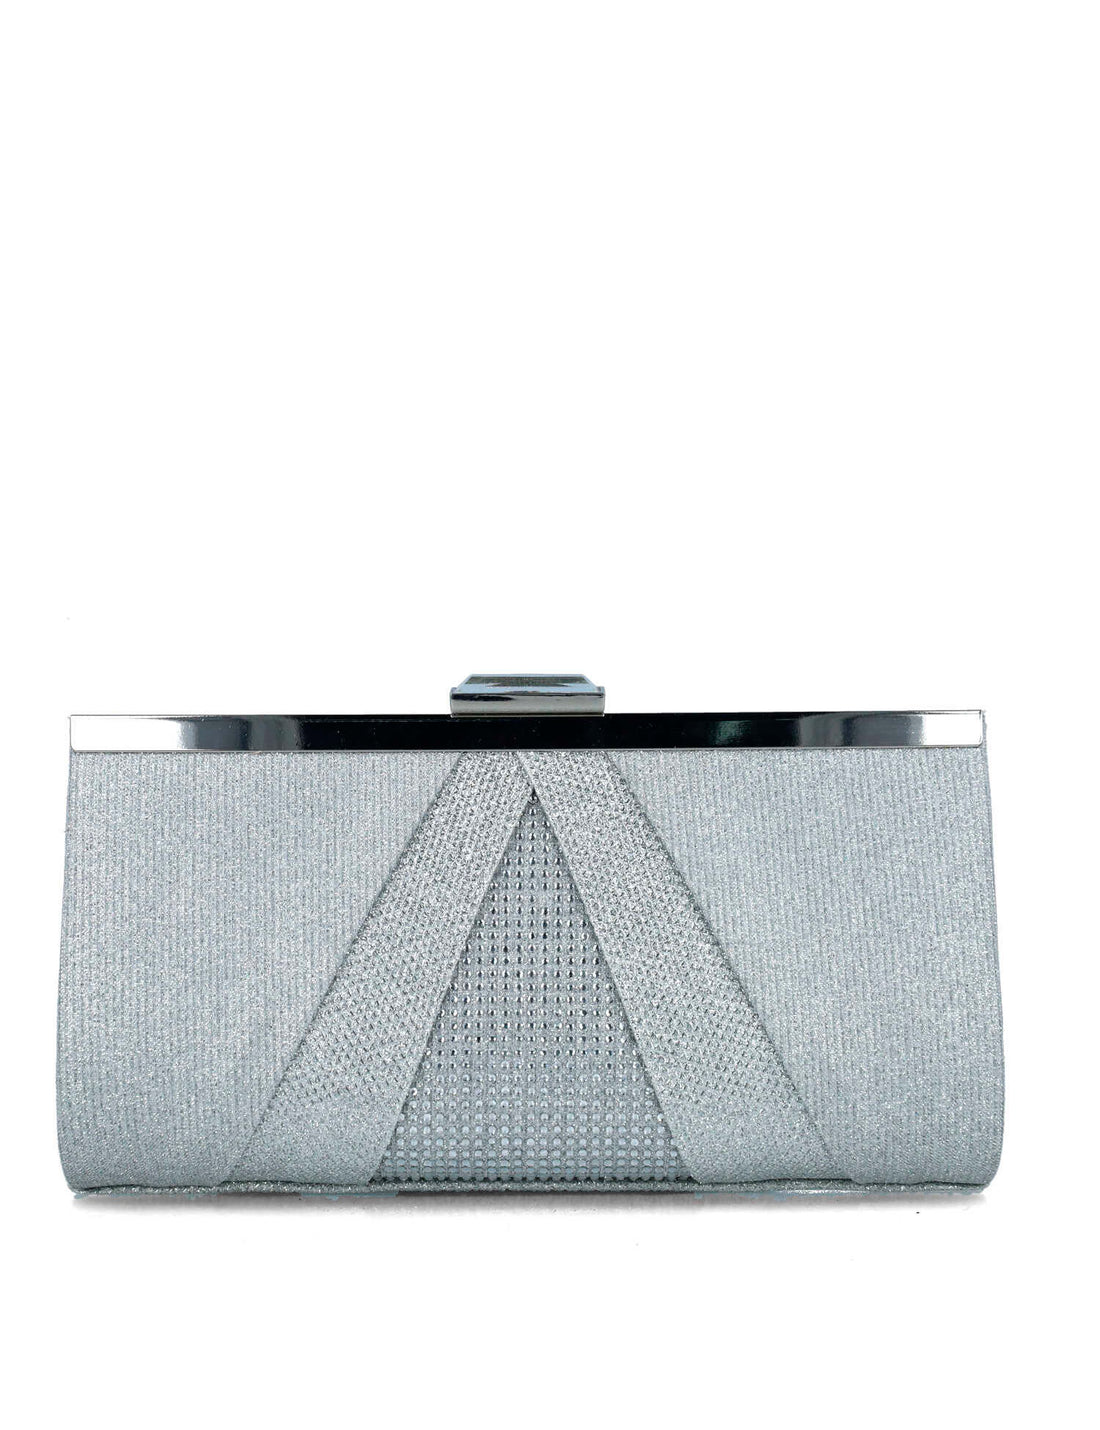 Silver Clutch With Silver Hardware_85511_09_01